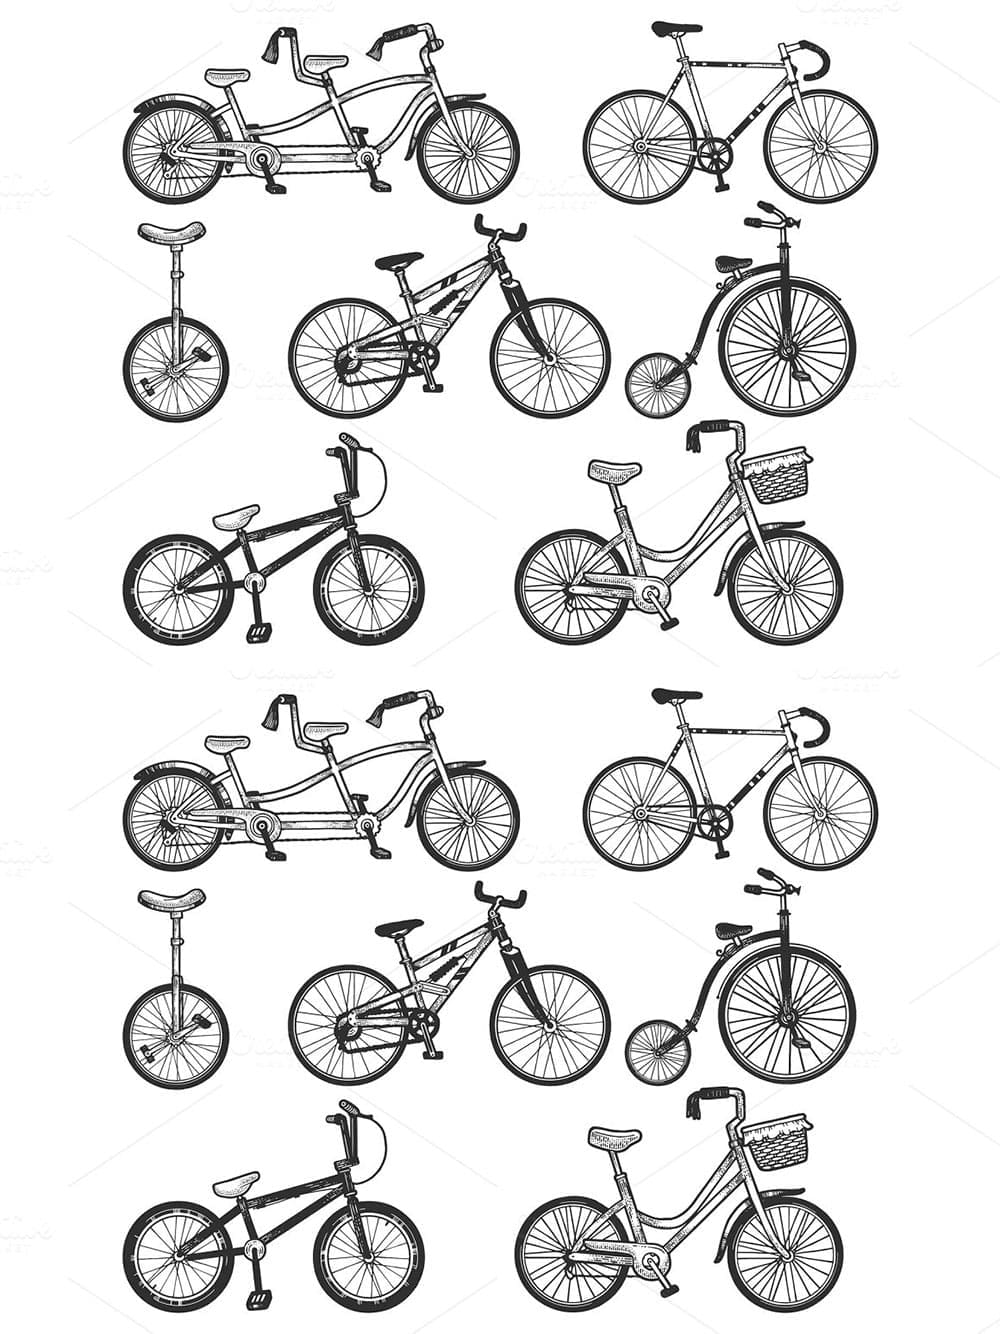 Bicycle set sketch engraving vector, picture for pinterest.